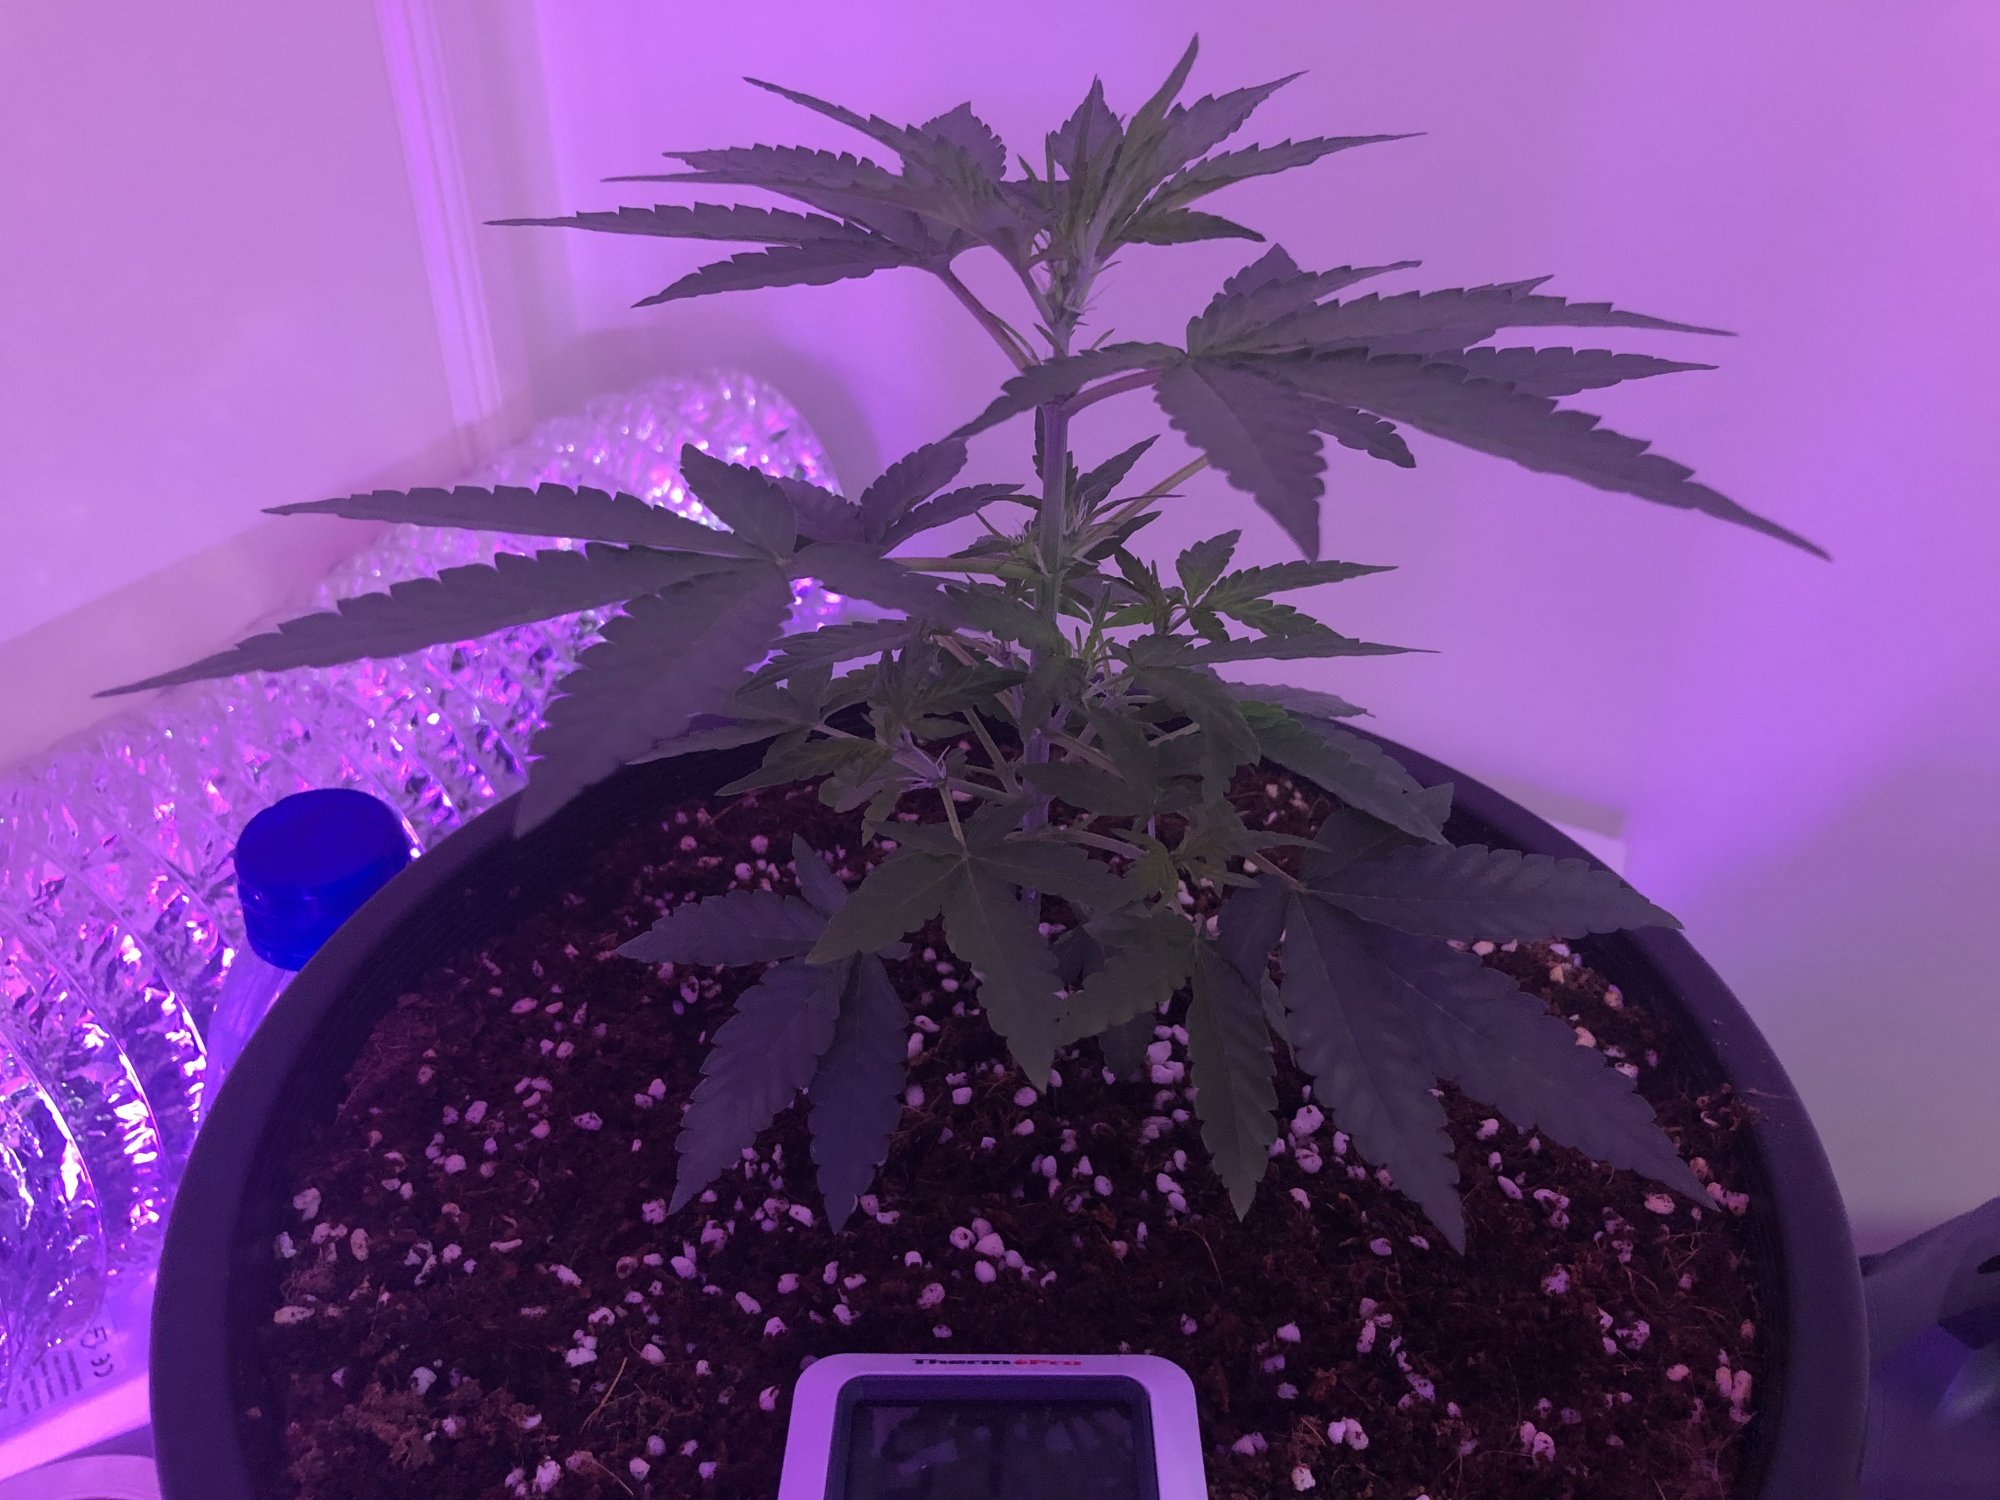 Whats peoples thoughts on my first plant grow